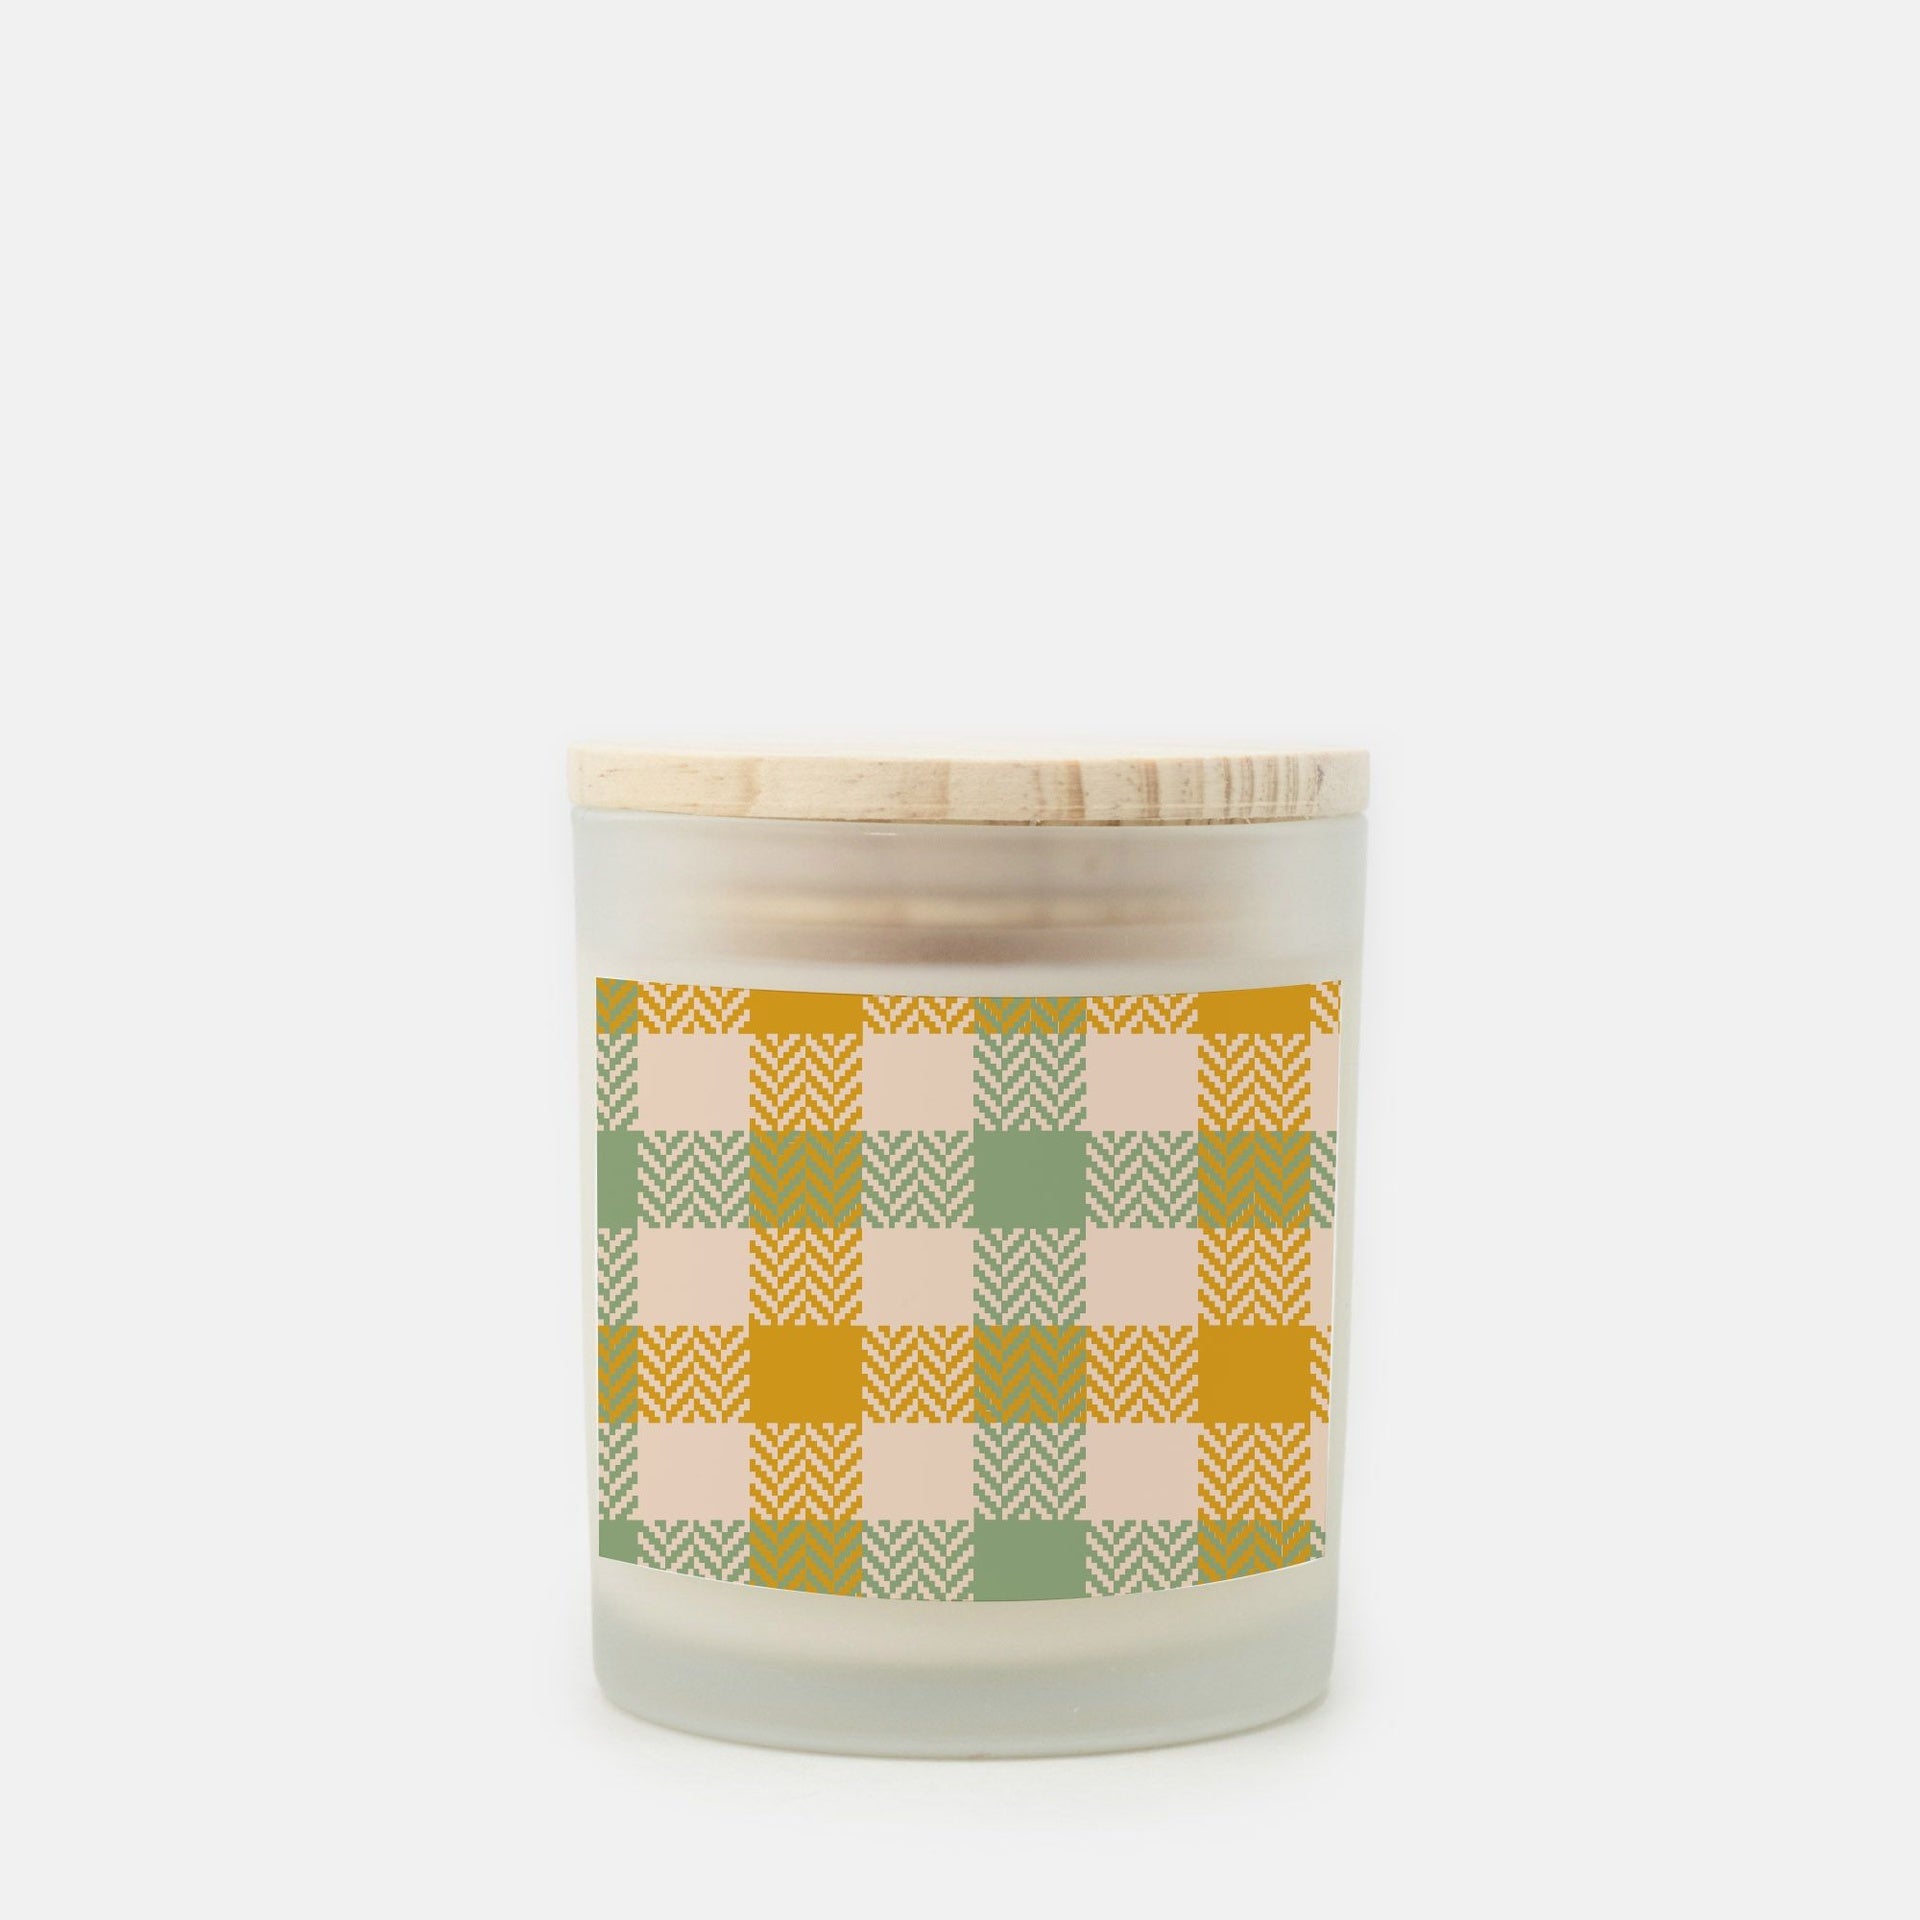 Lifestyle Details - Yellow & Green Plaid Frosted Glass Candle - Cashmere Vanilla